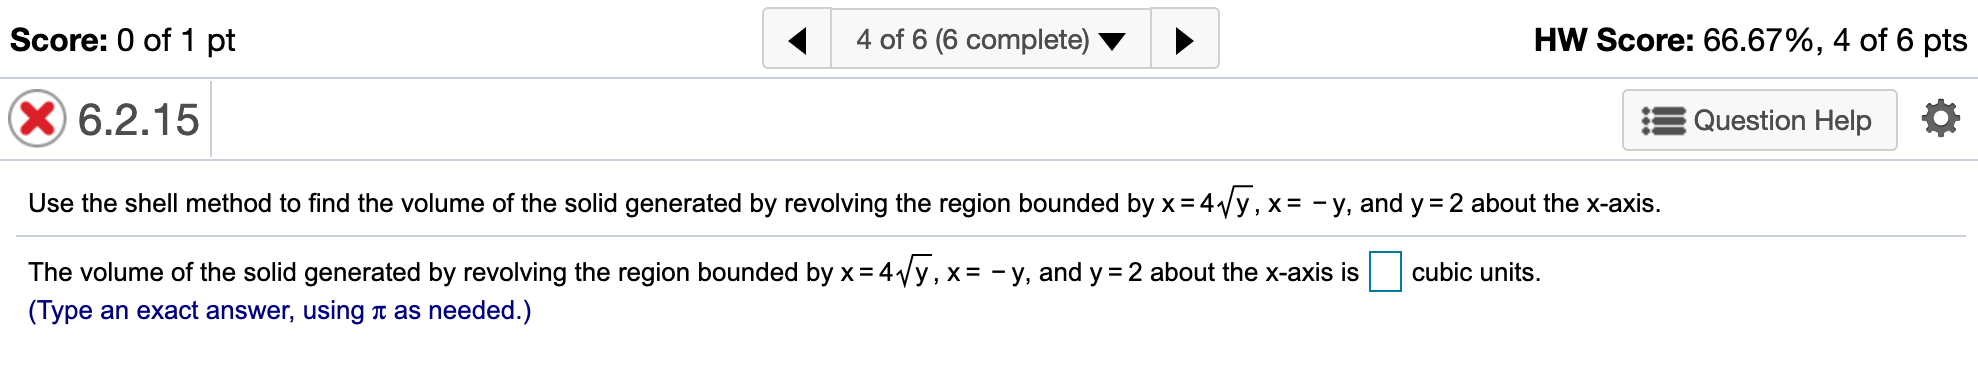 Score: 0 of 1 pt
4 of 6 (6 complete)
HW Score: 66.67%, 4 of 6 pts
X6.2.15
Question Help
Use the shell method to find the volume of the solid generated by revolving the region bounded by x 4y, x = -y, and y
2 about the x-axis.
The volume of the solid generated by revolving the region bounded by x 4Vy, x= - y, and y
cubic units
2 about the x-axis is
(Type an exact answer, using
t as needed.)
